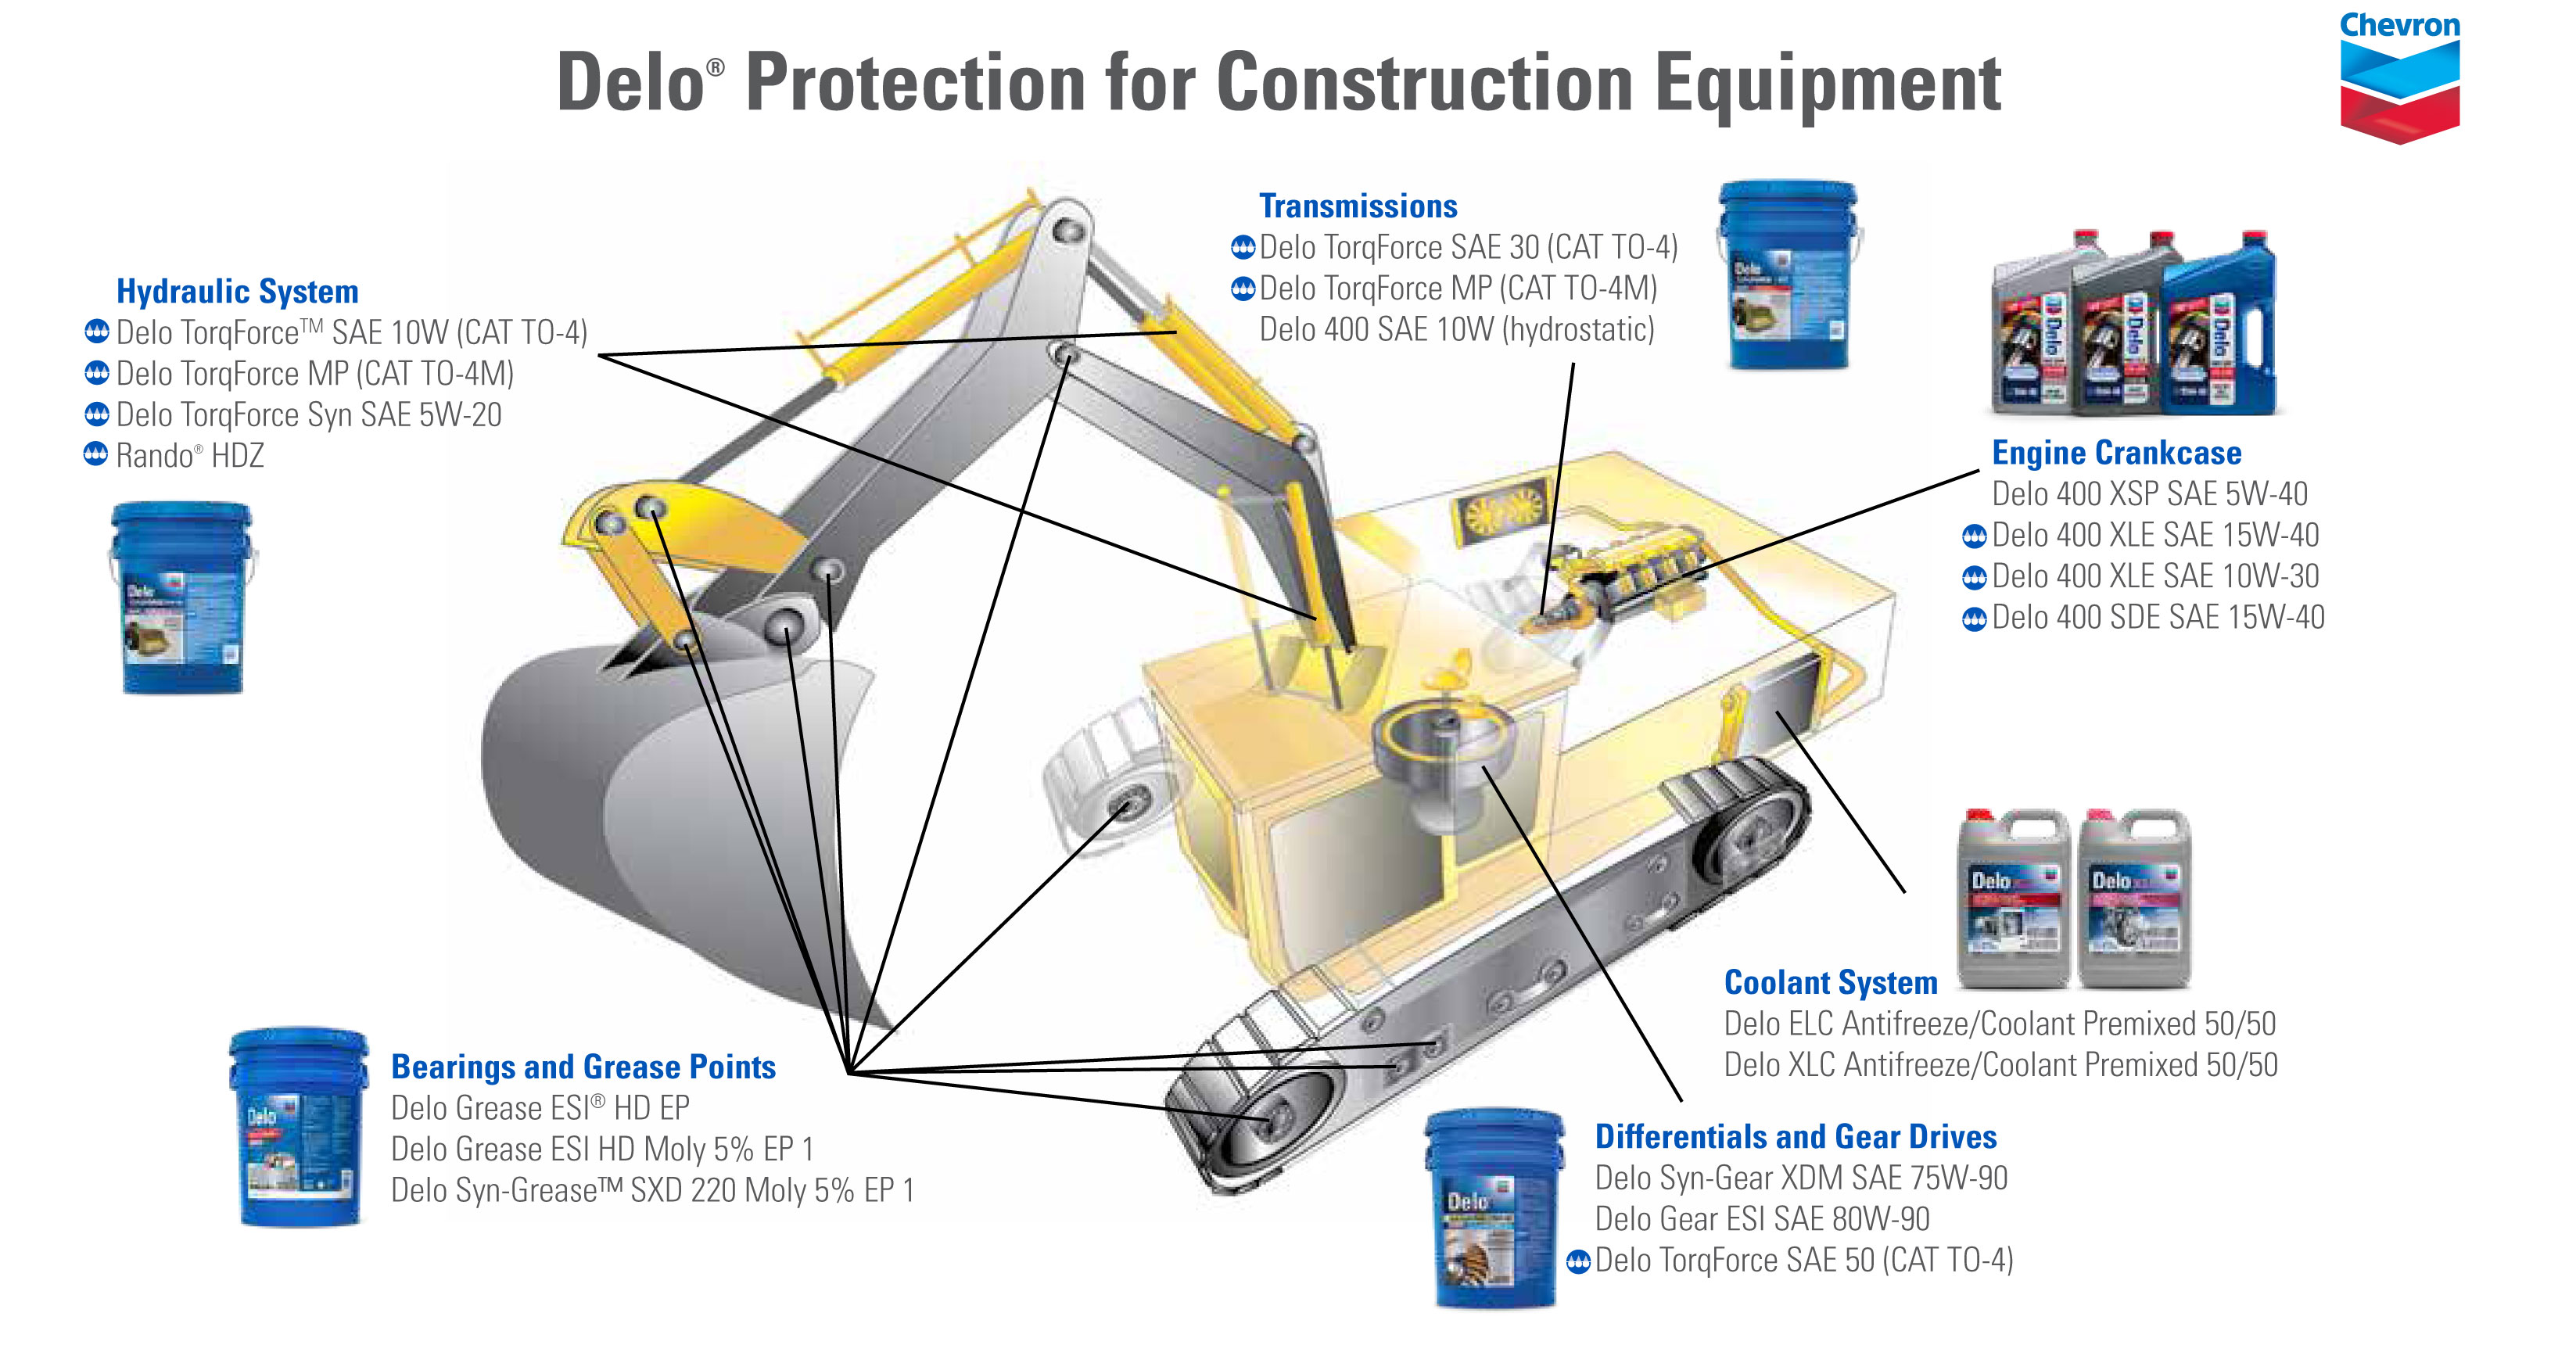 Delo-Protection-for-Construction-Equipment-Sutton-System-Sales